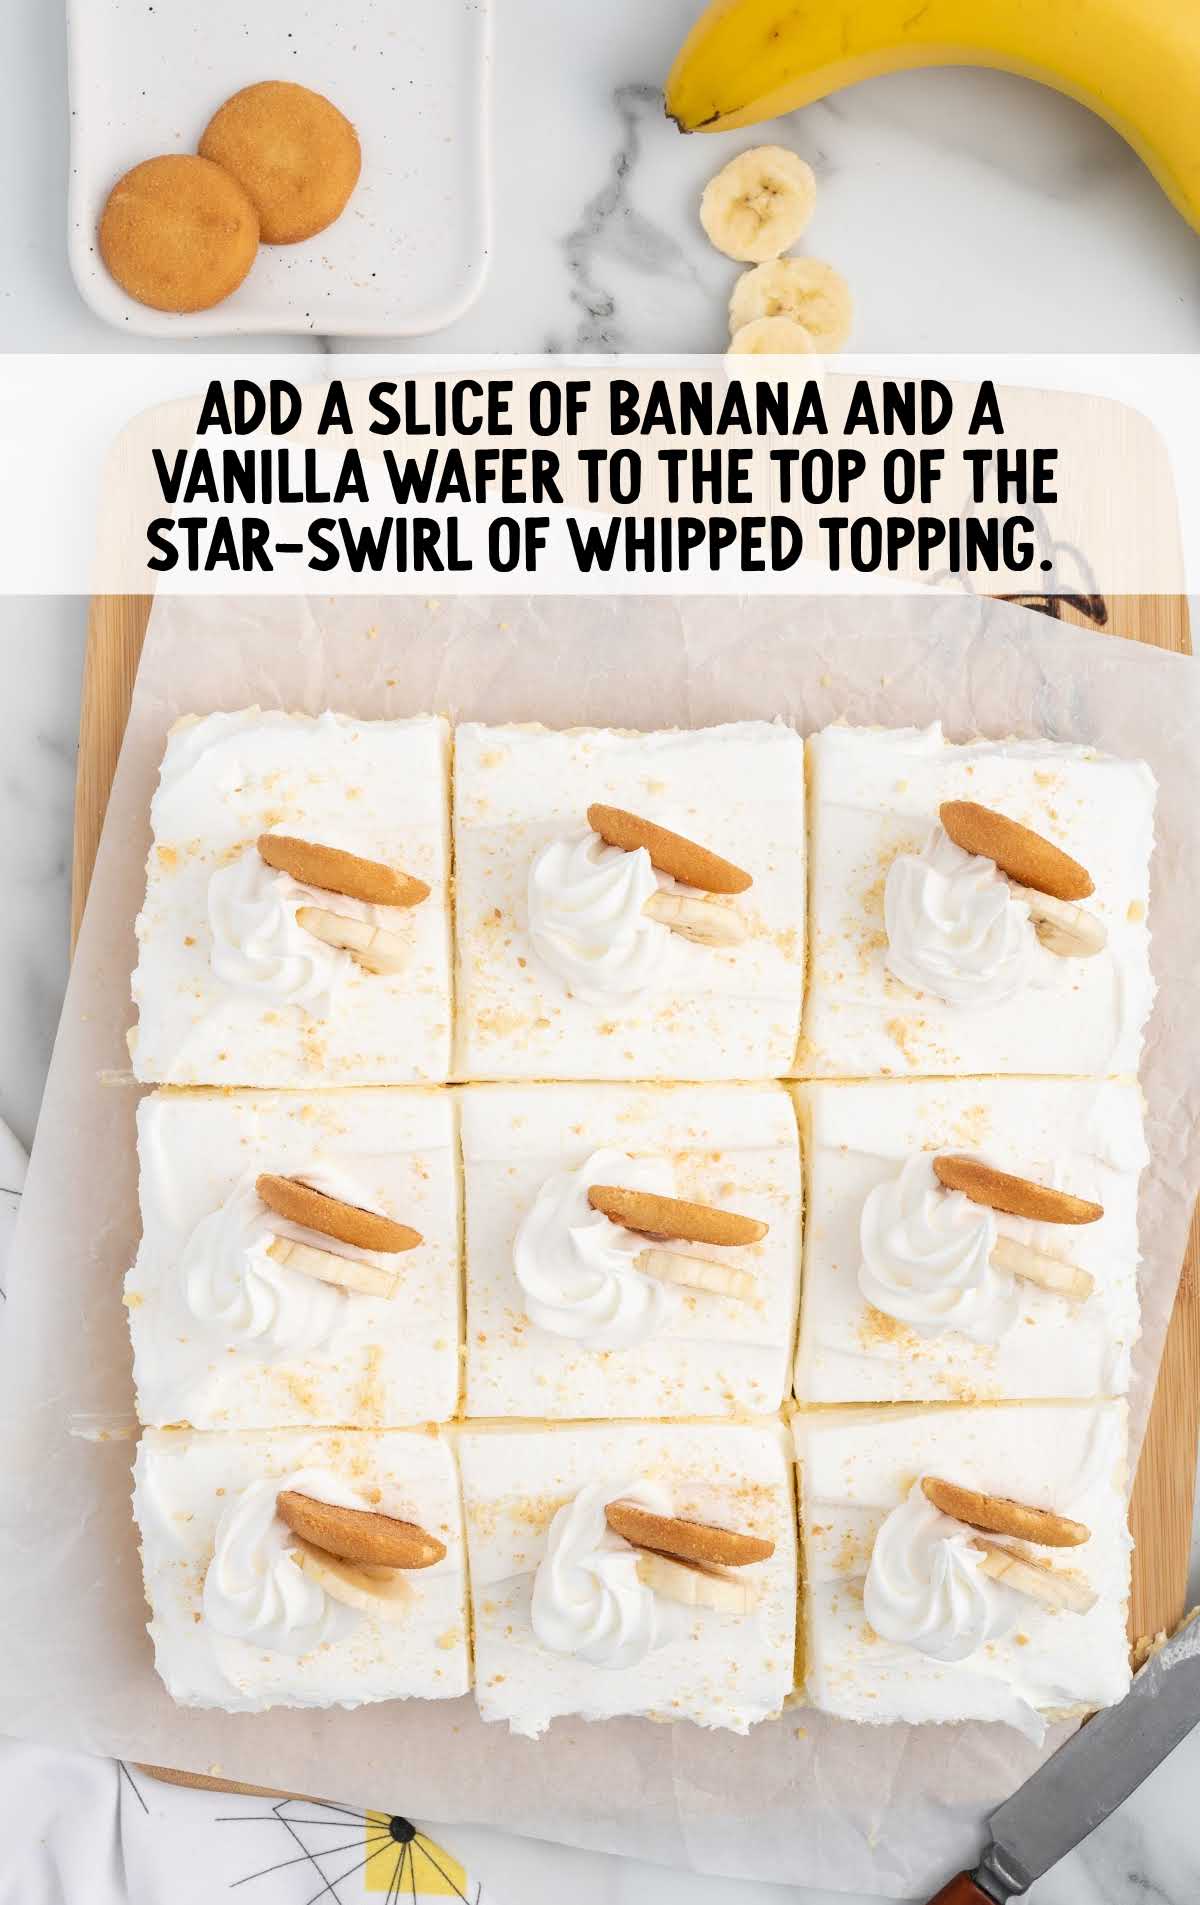 slices of banana and vanilla wafer added to the top of the whipped topping